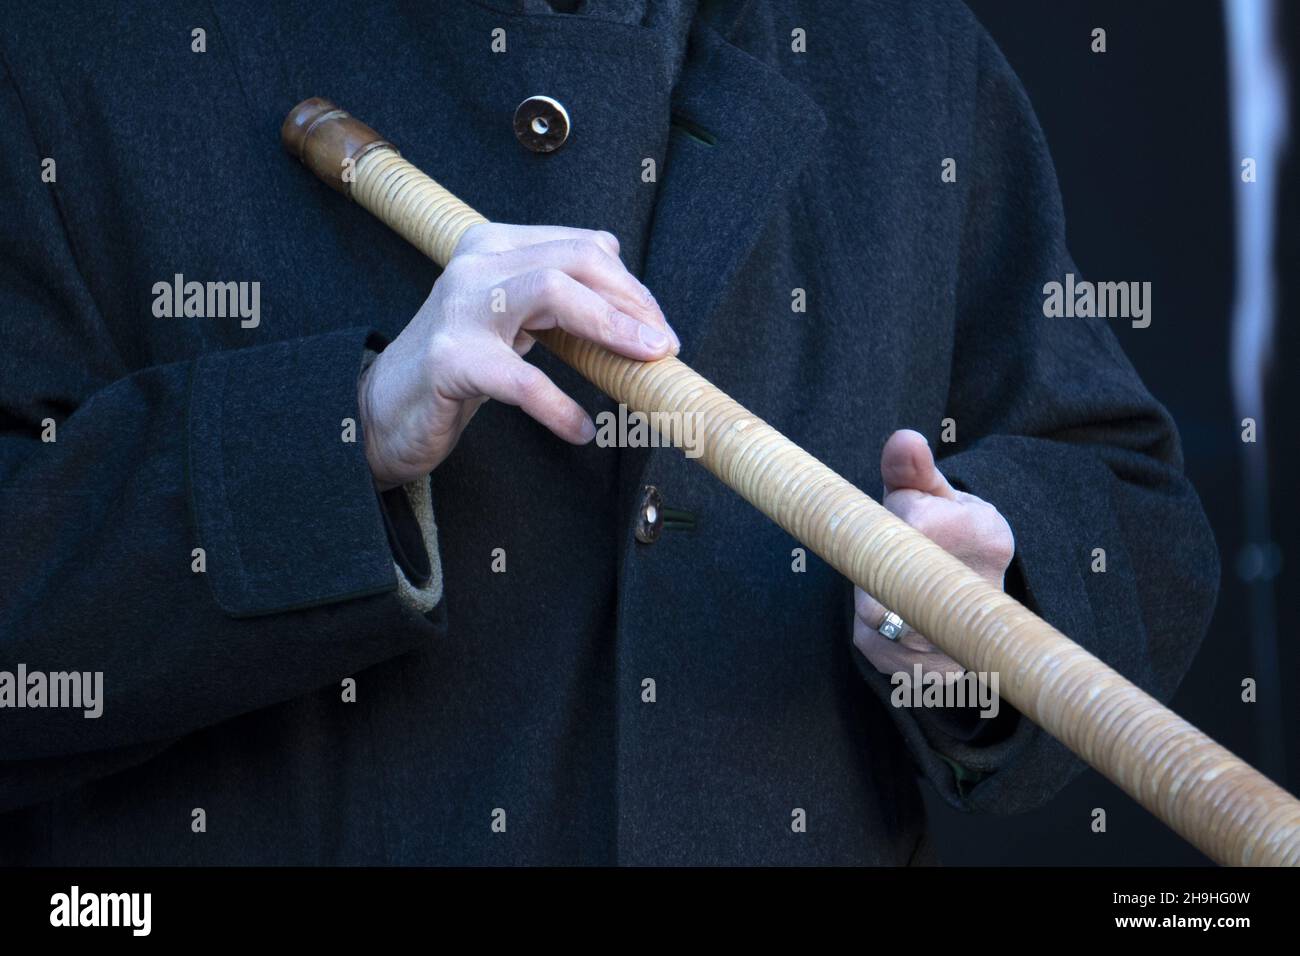 Wood mountain traditional horn musical instrument close up Stock Photo